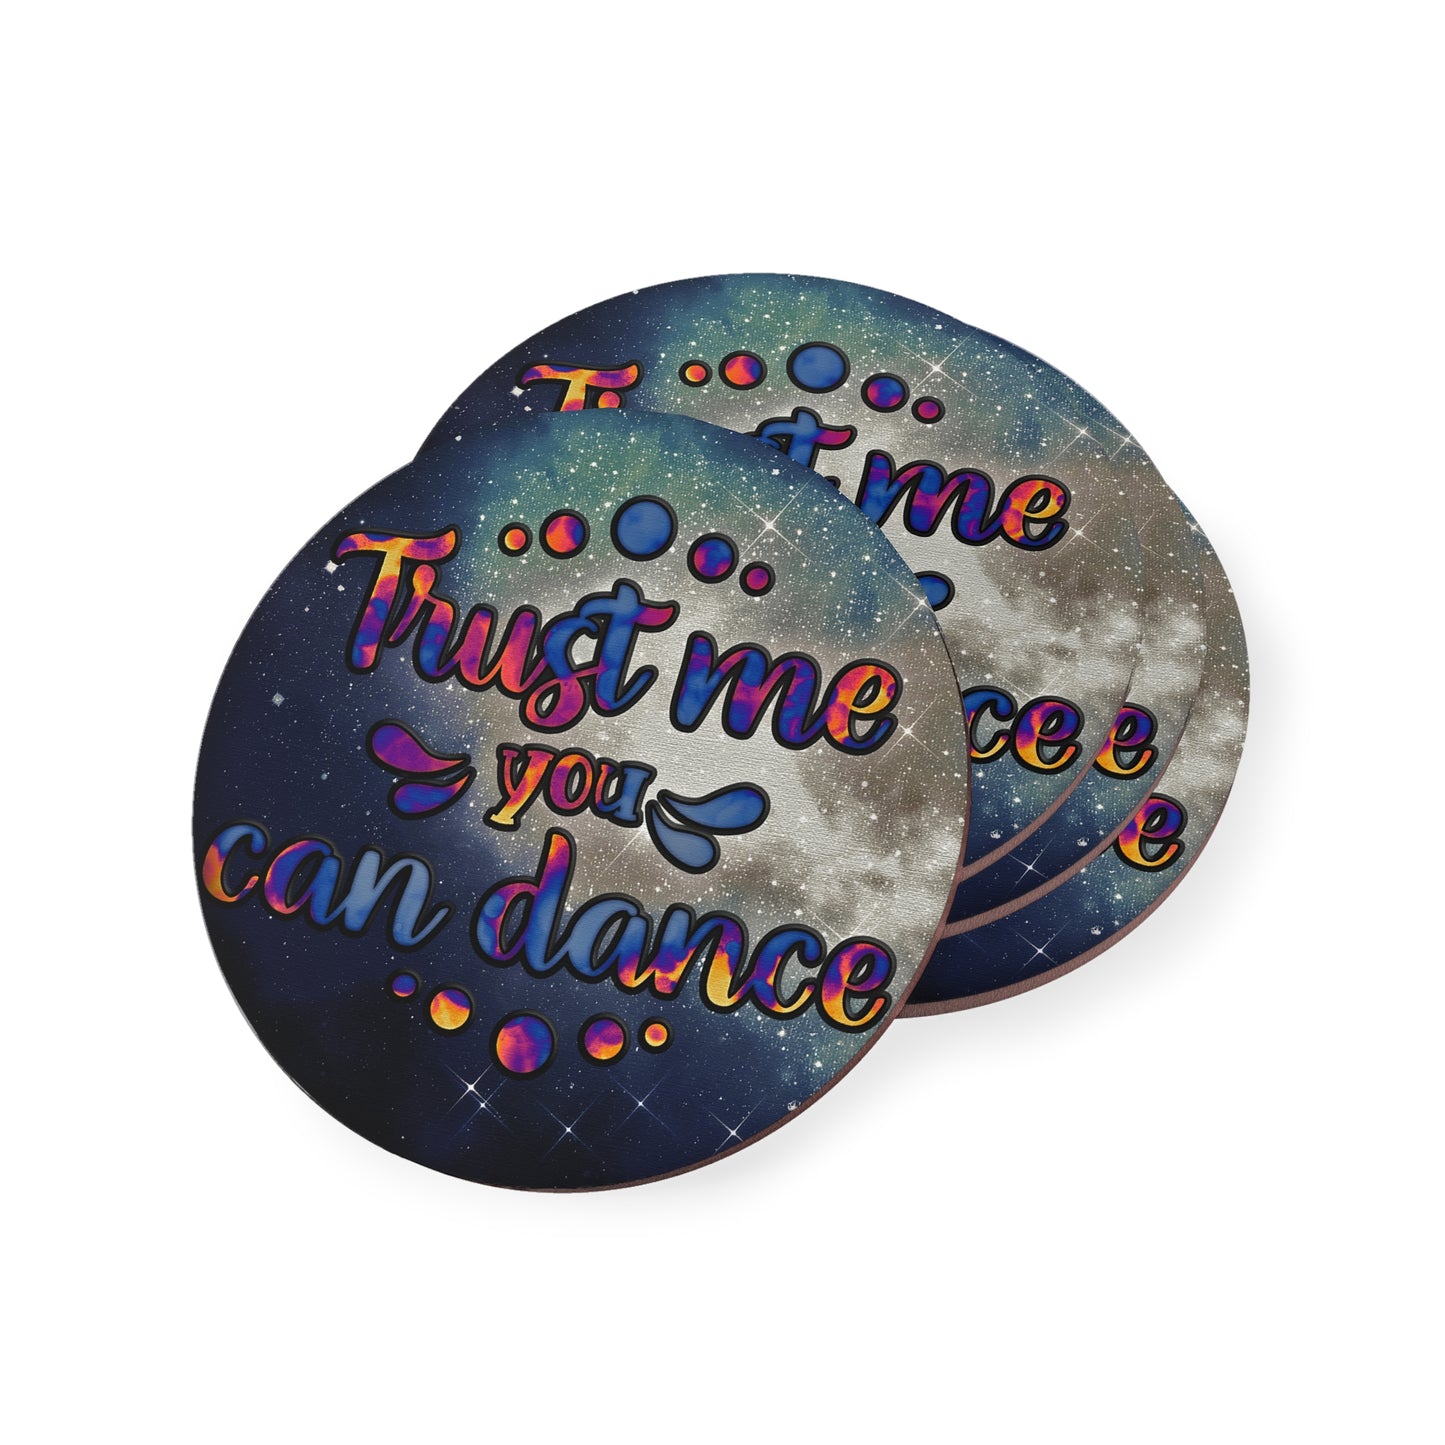 " Trust Me You Can Dance " Round Coasters